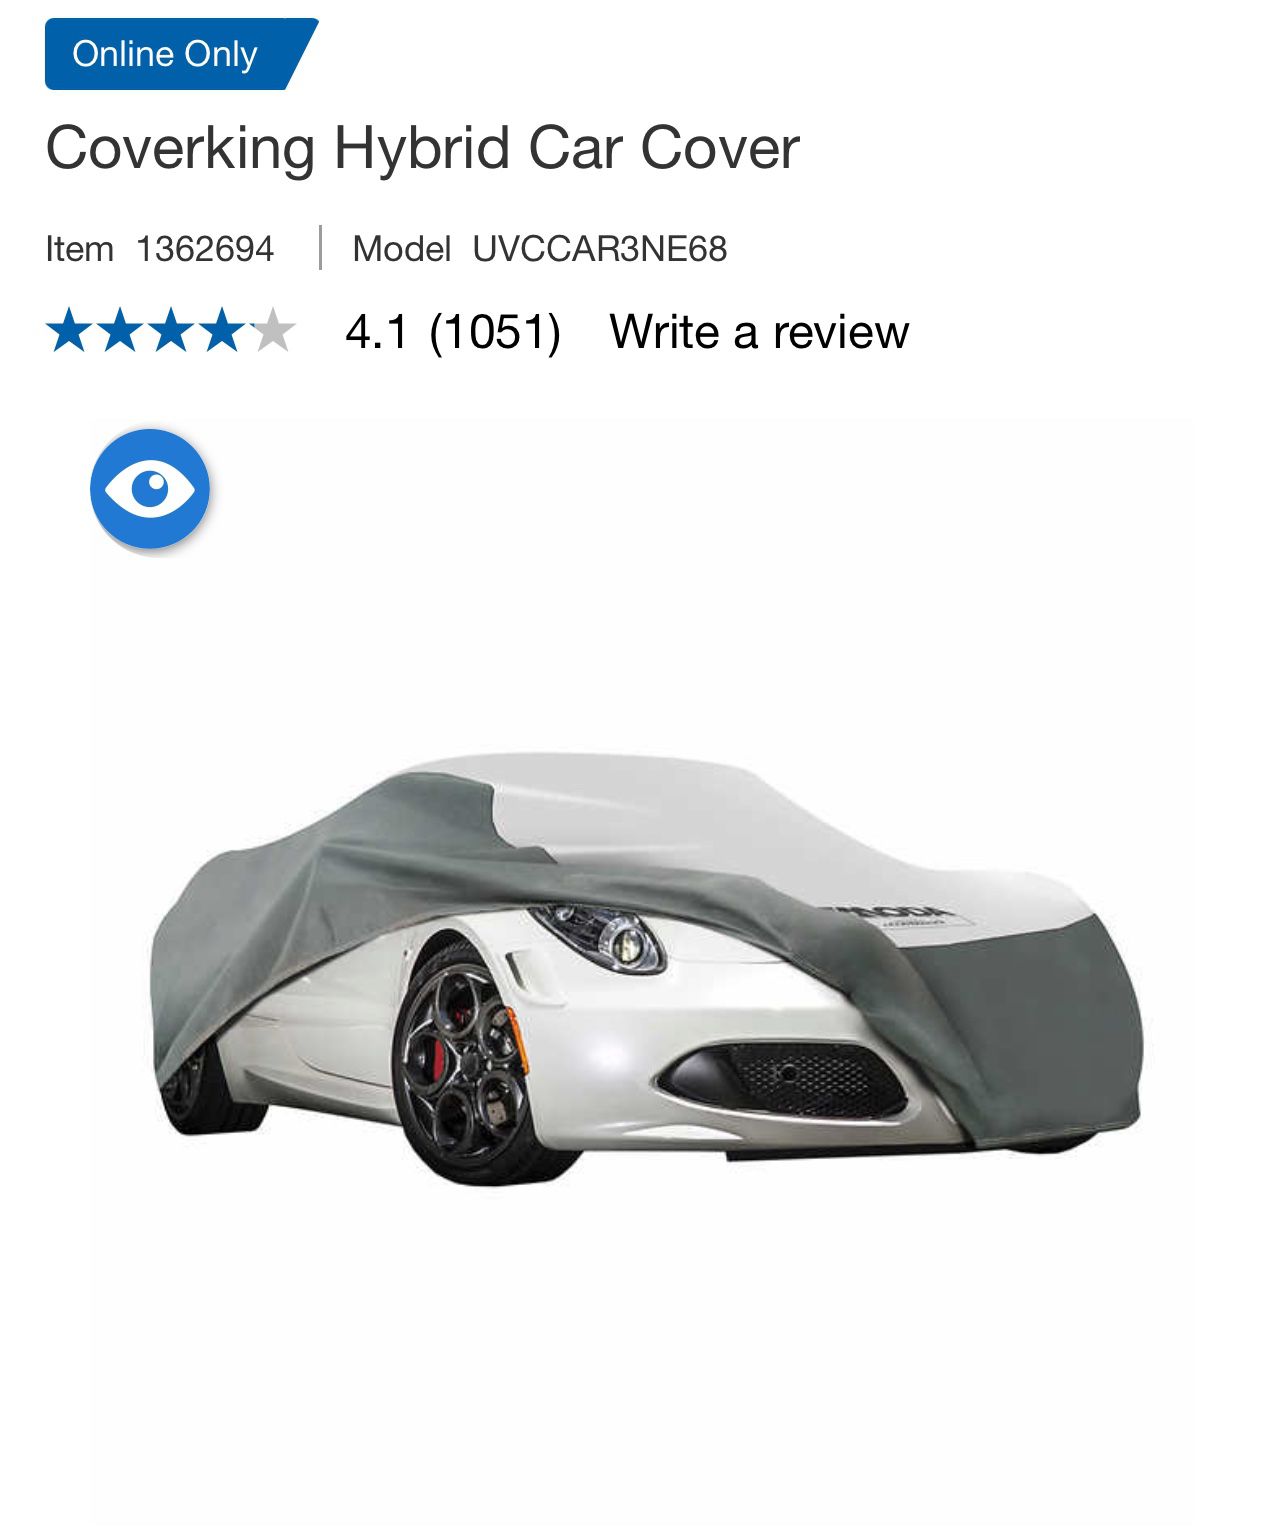 CoverKing Universal Hybrid Car Cover - Fits Sedans up to 16’ 8”